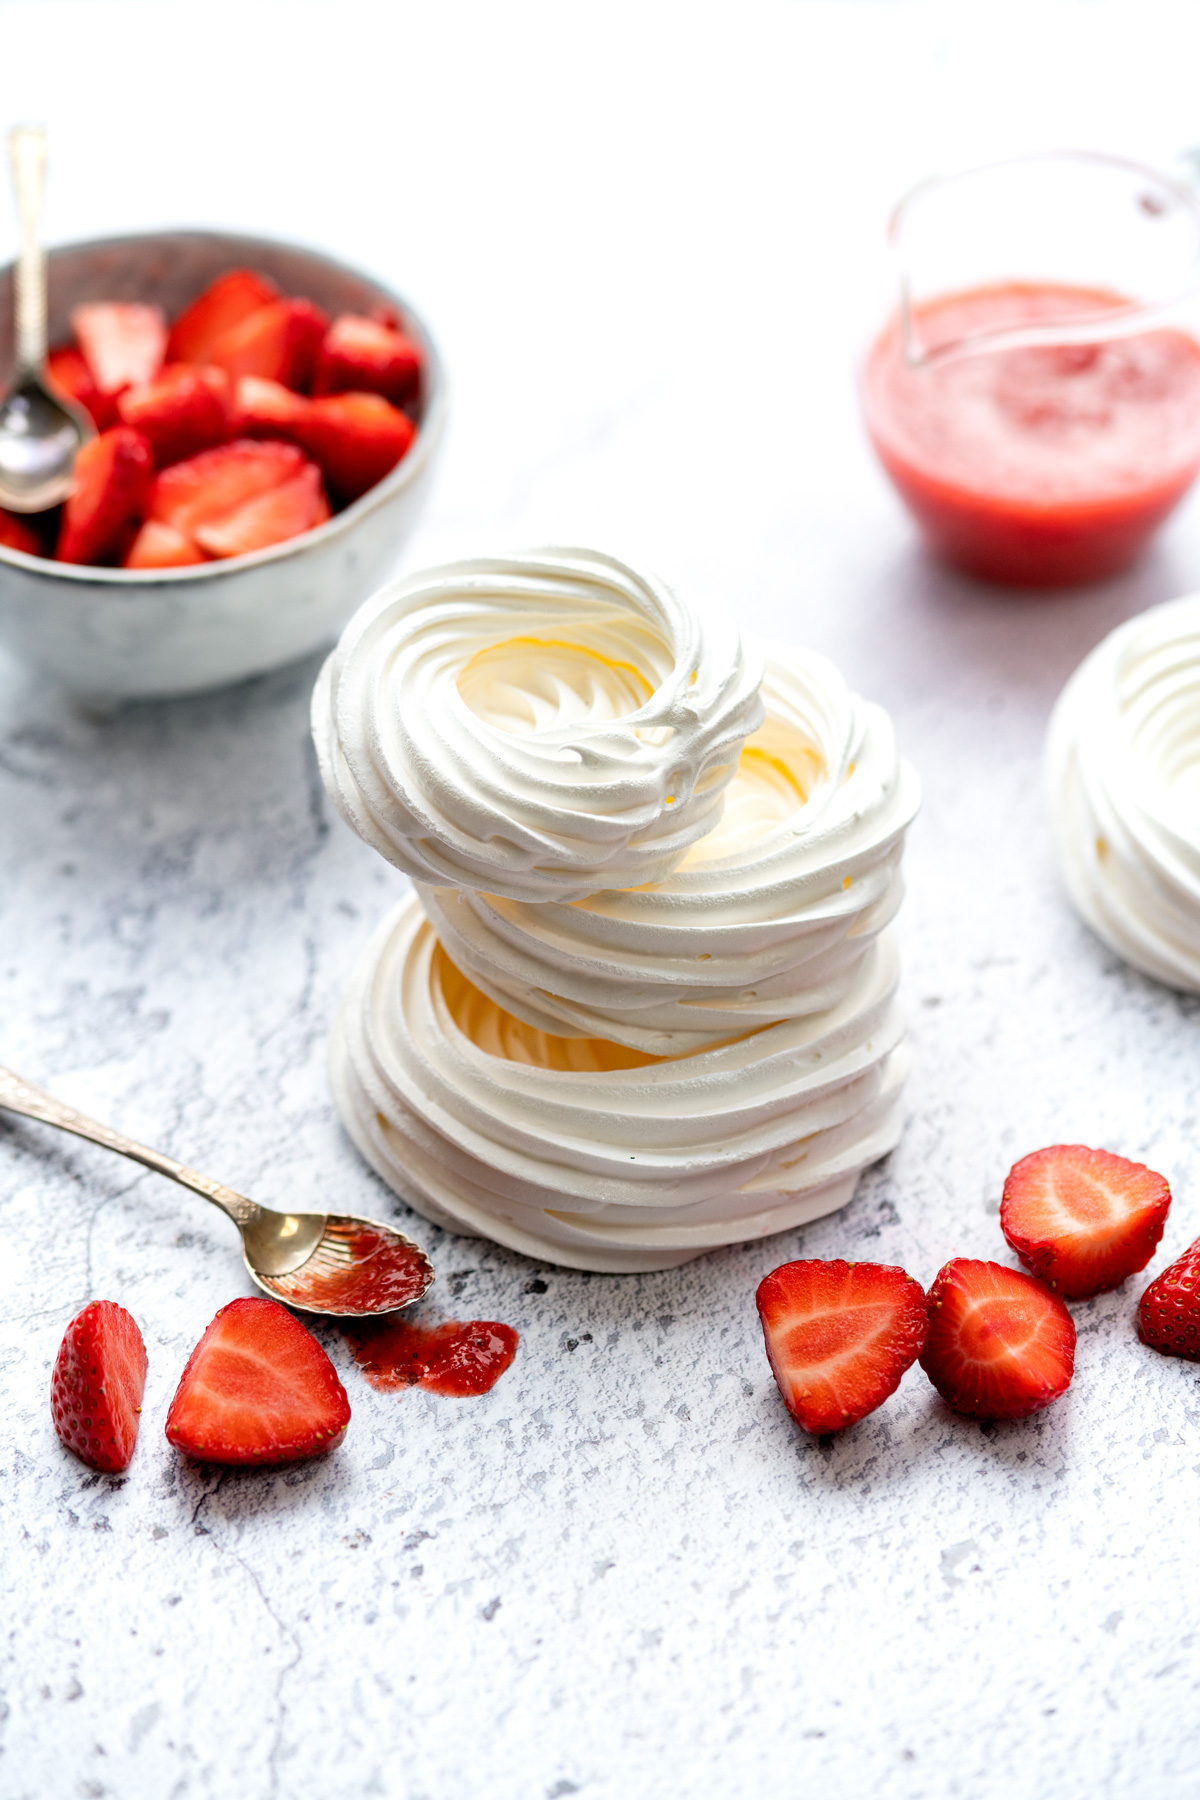 Three meringue nests stacked with a bowl of sliced strawberries on the side